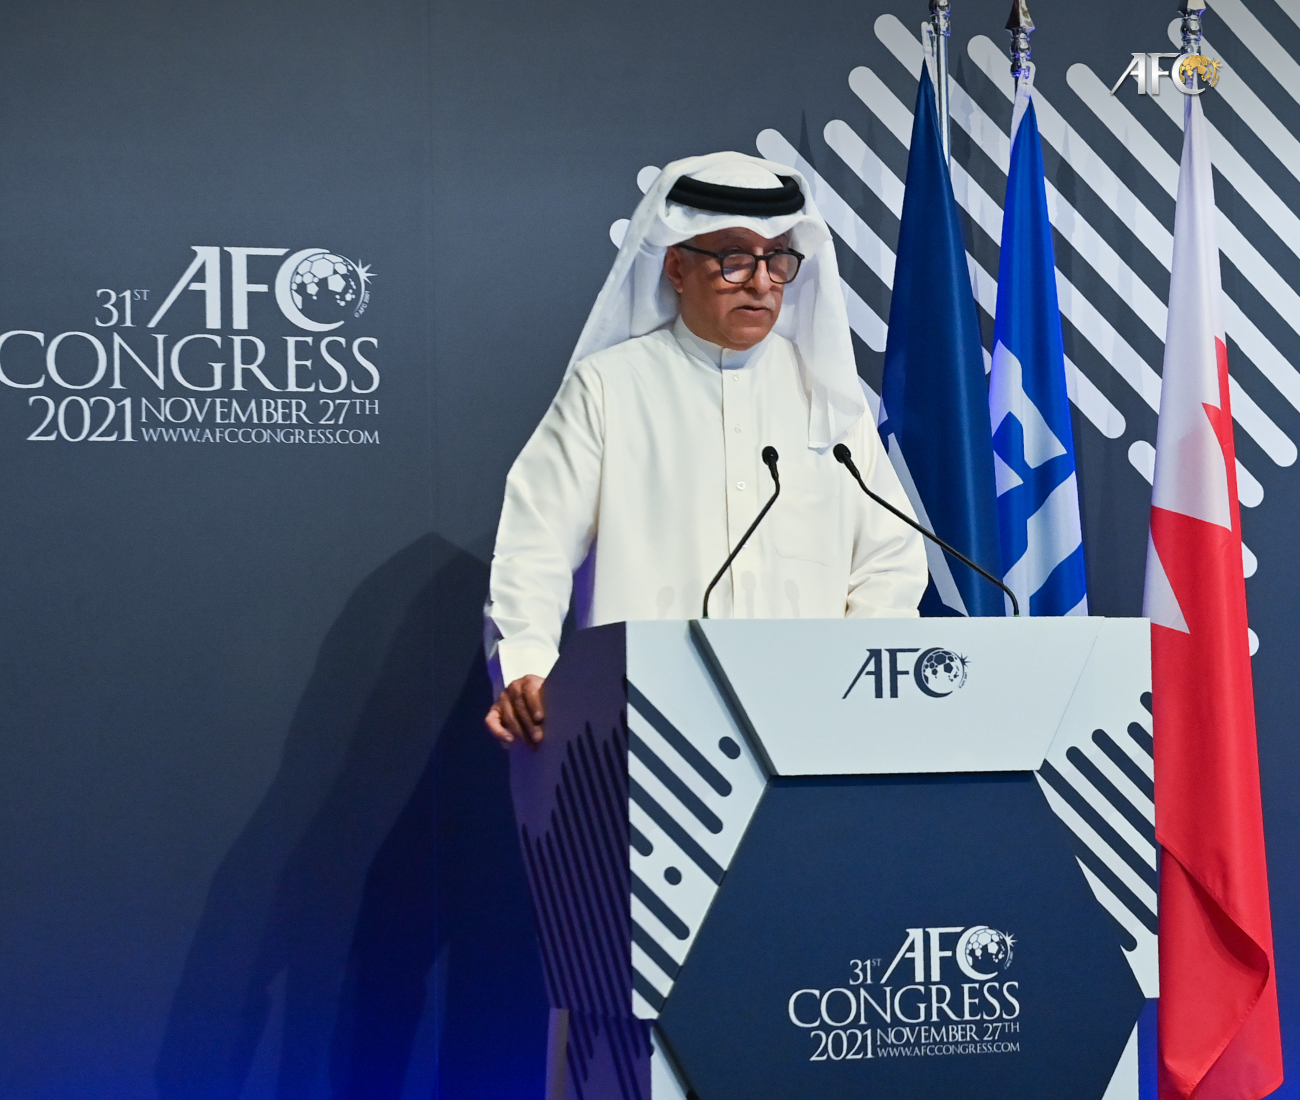 AFC vows to support delivery of successful Qatar 2022 FIFA World Cup at Congress